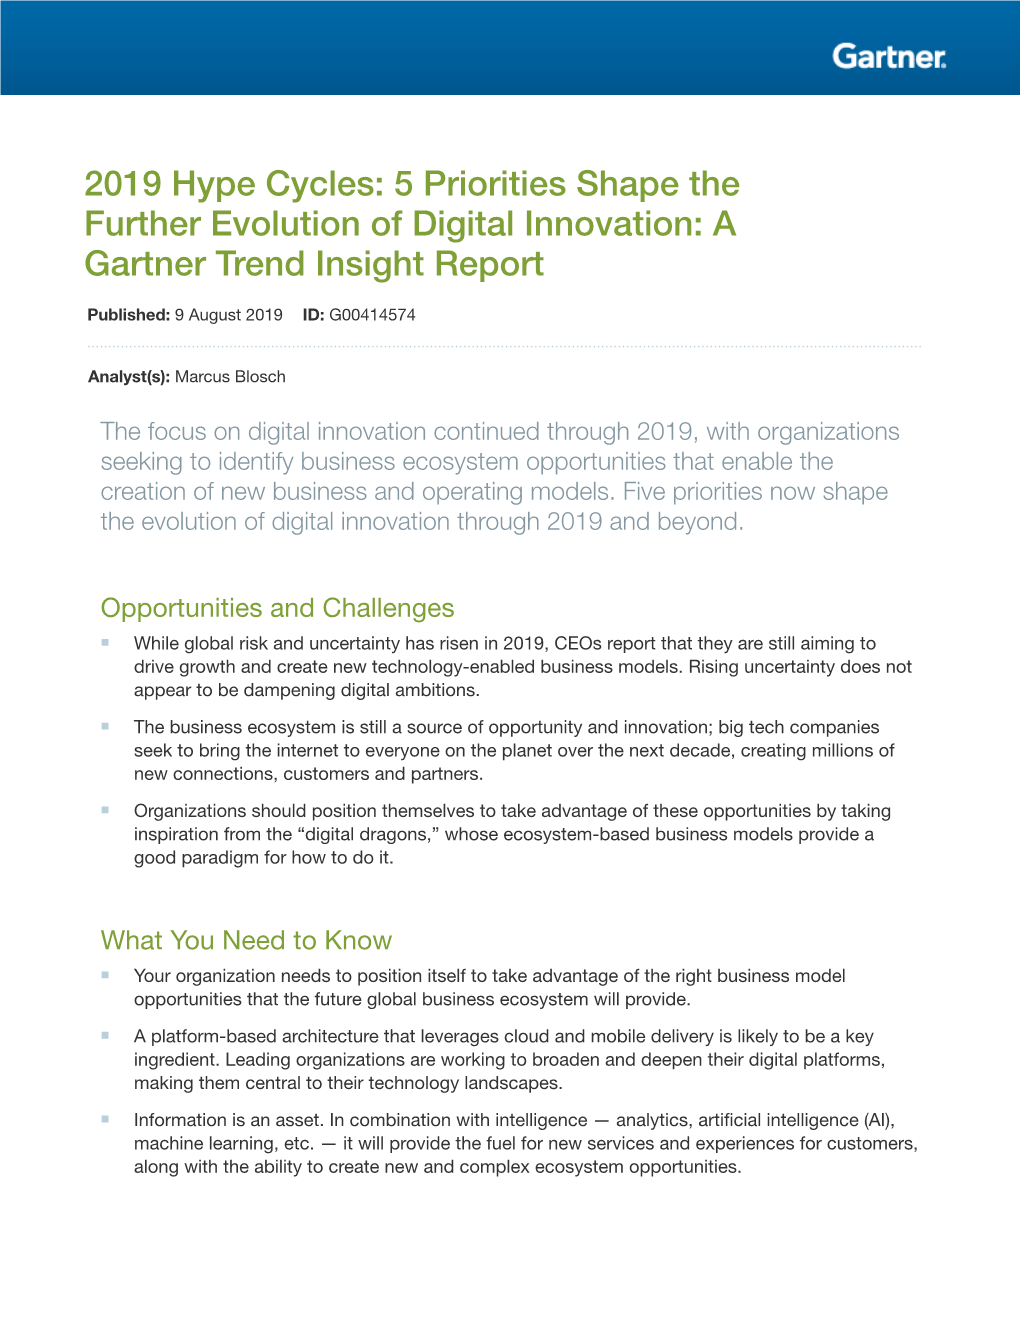 2019 Hype Cycles: 5 Priorities Shape the Further Evolution of Digital Innovation: a Gartner Trend Insight Report